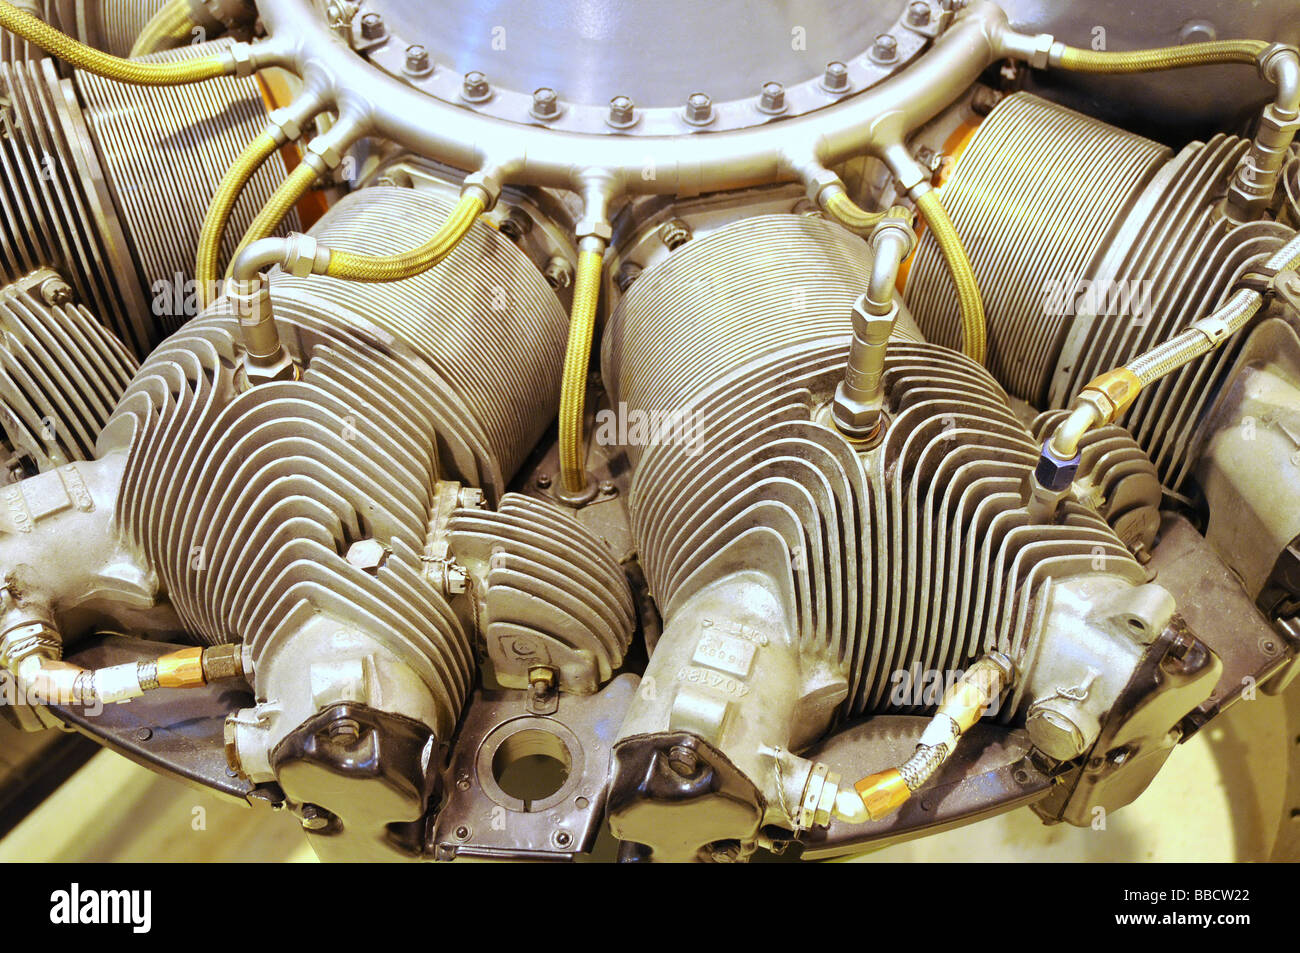 Close-up of radial helicopter engine Stock Photo